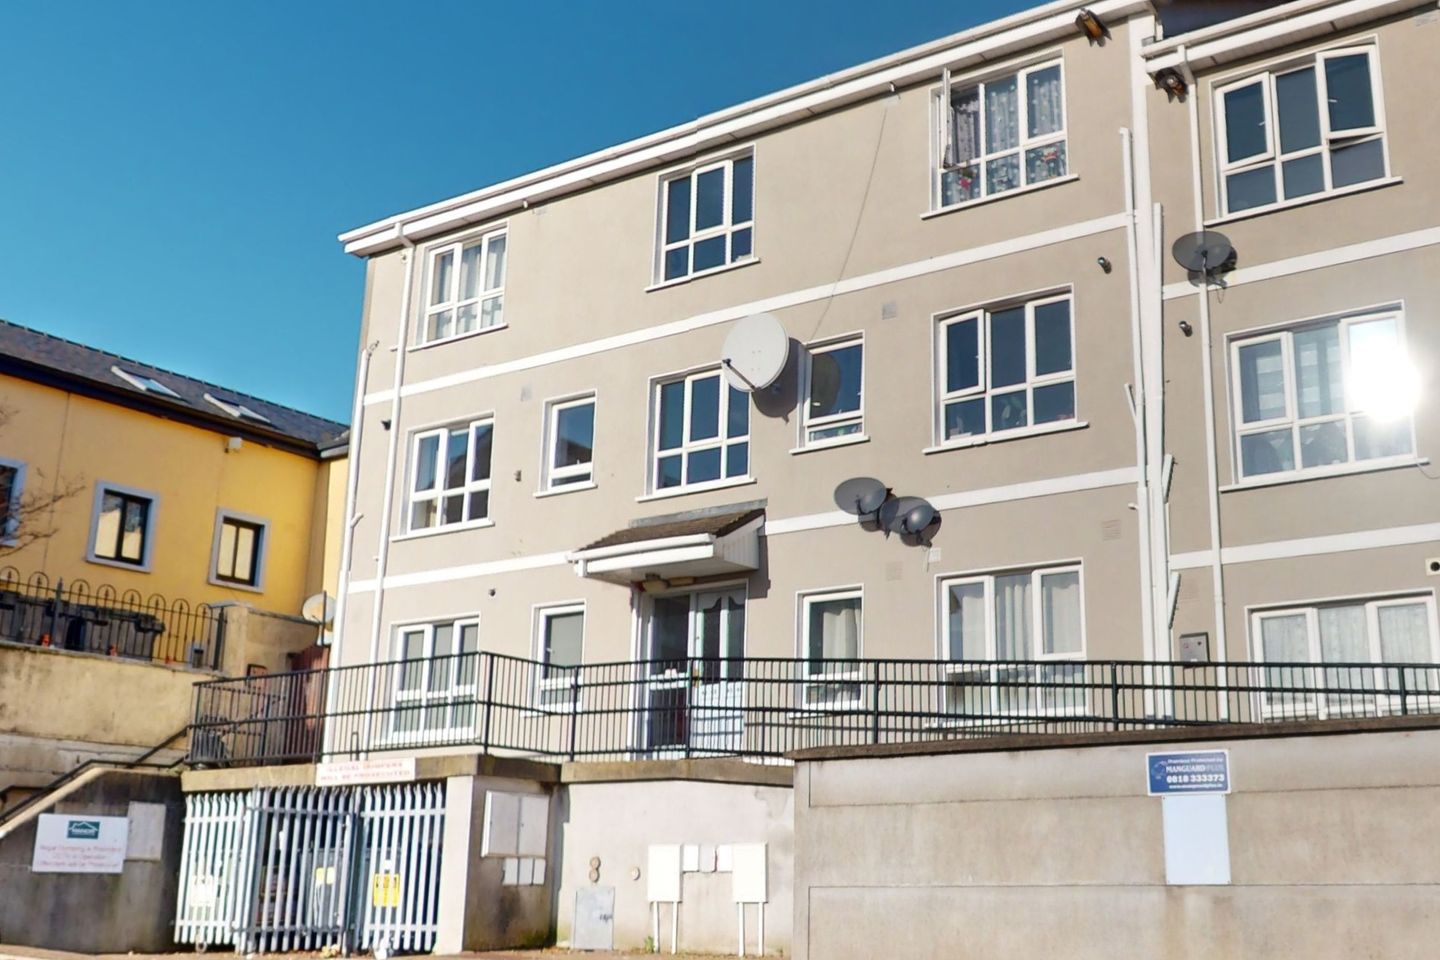 Apartment 42, Shandon Court, Waterford City, Co. Waterford, X91AHY5